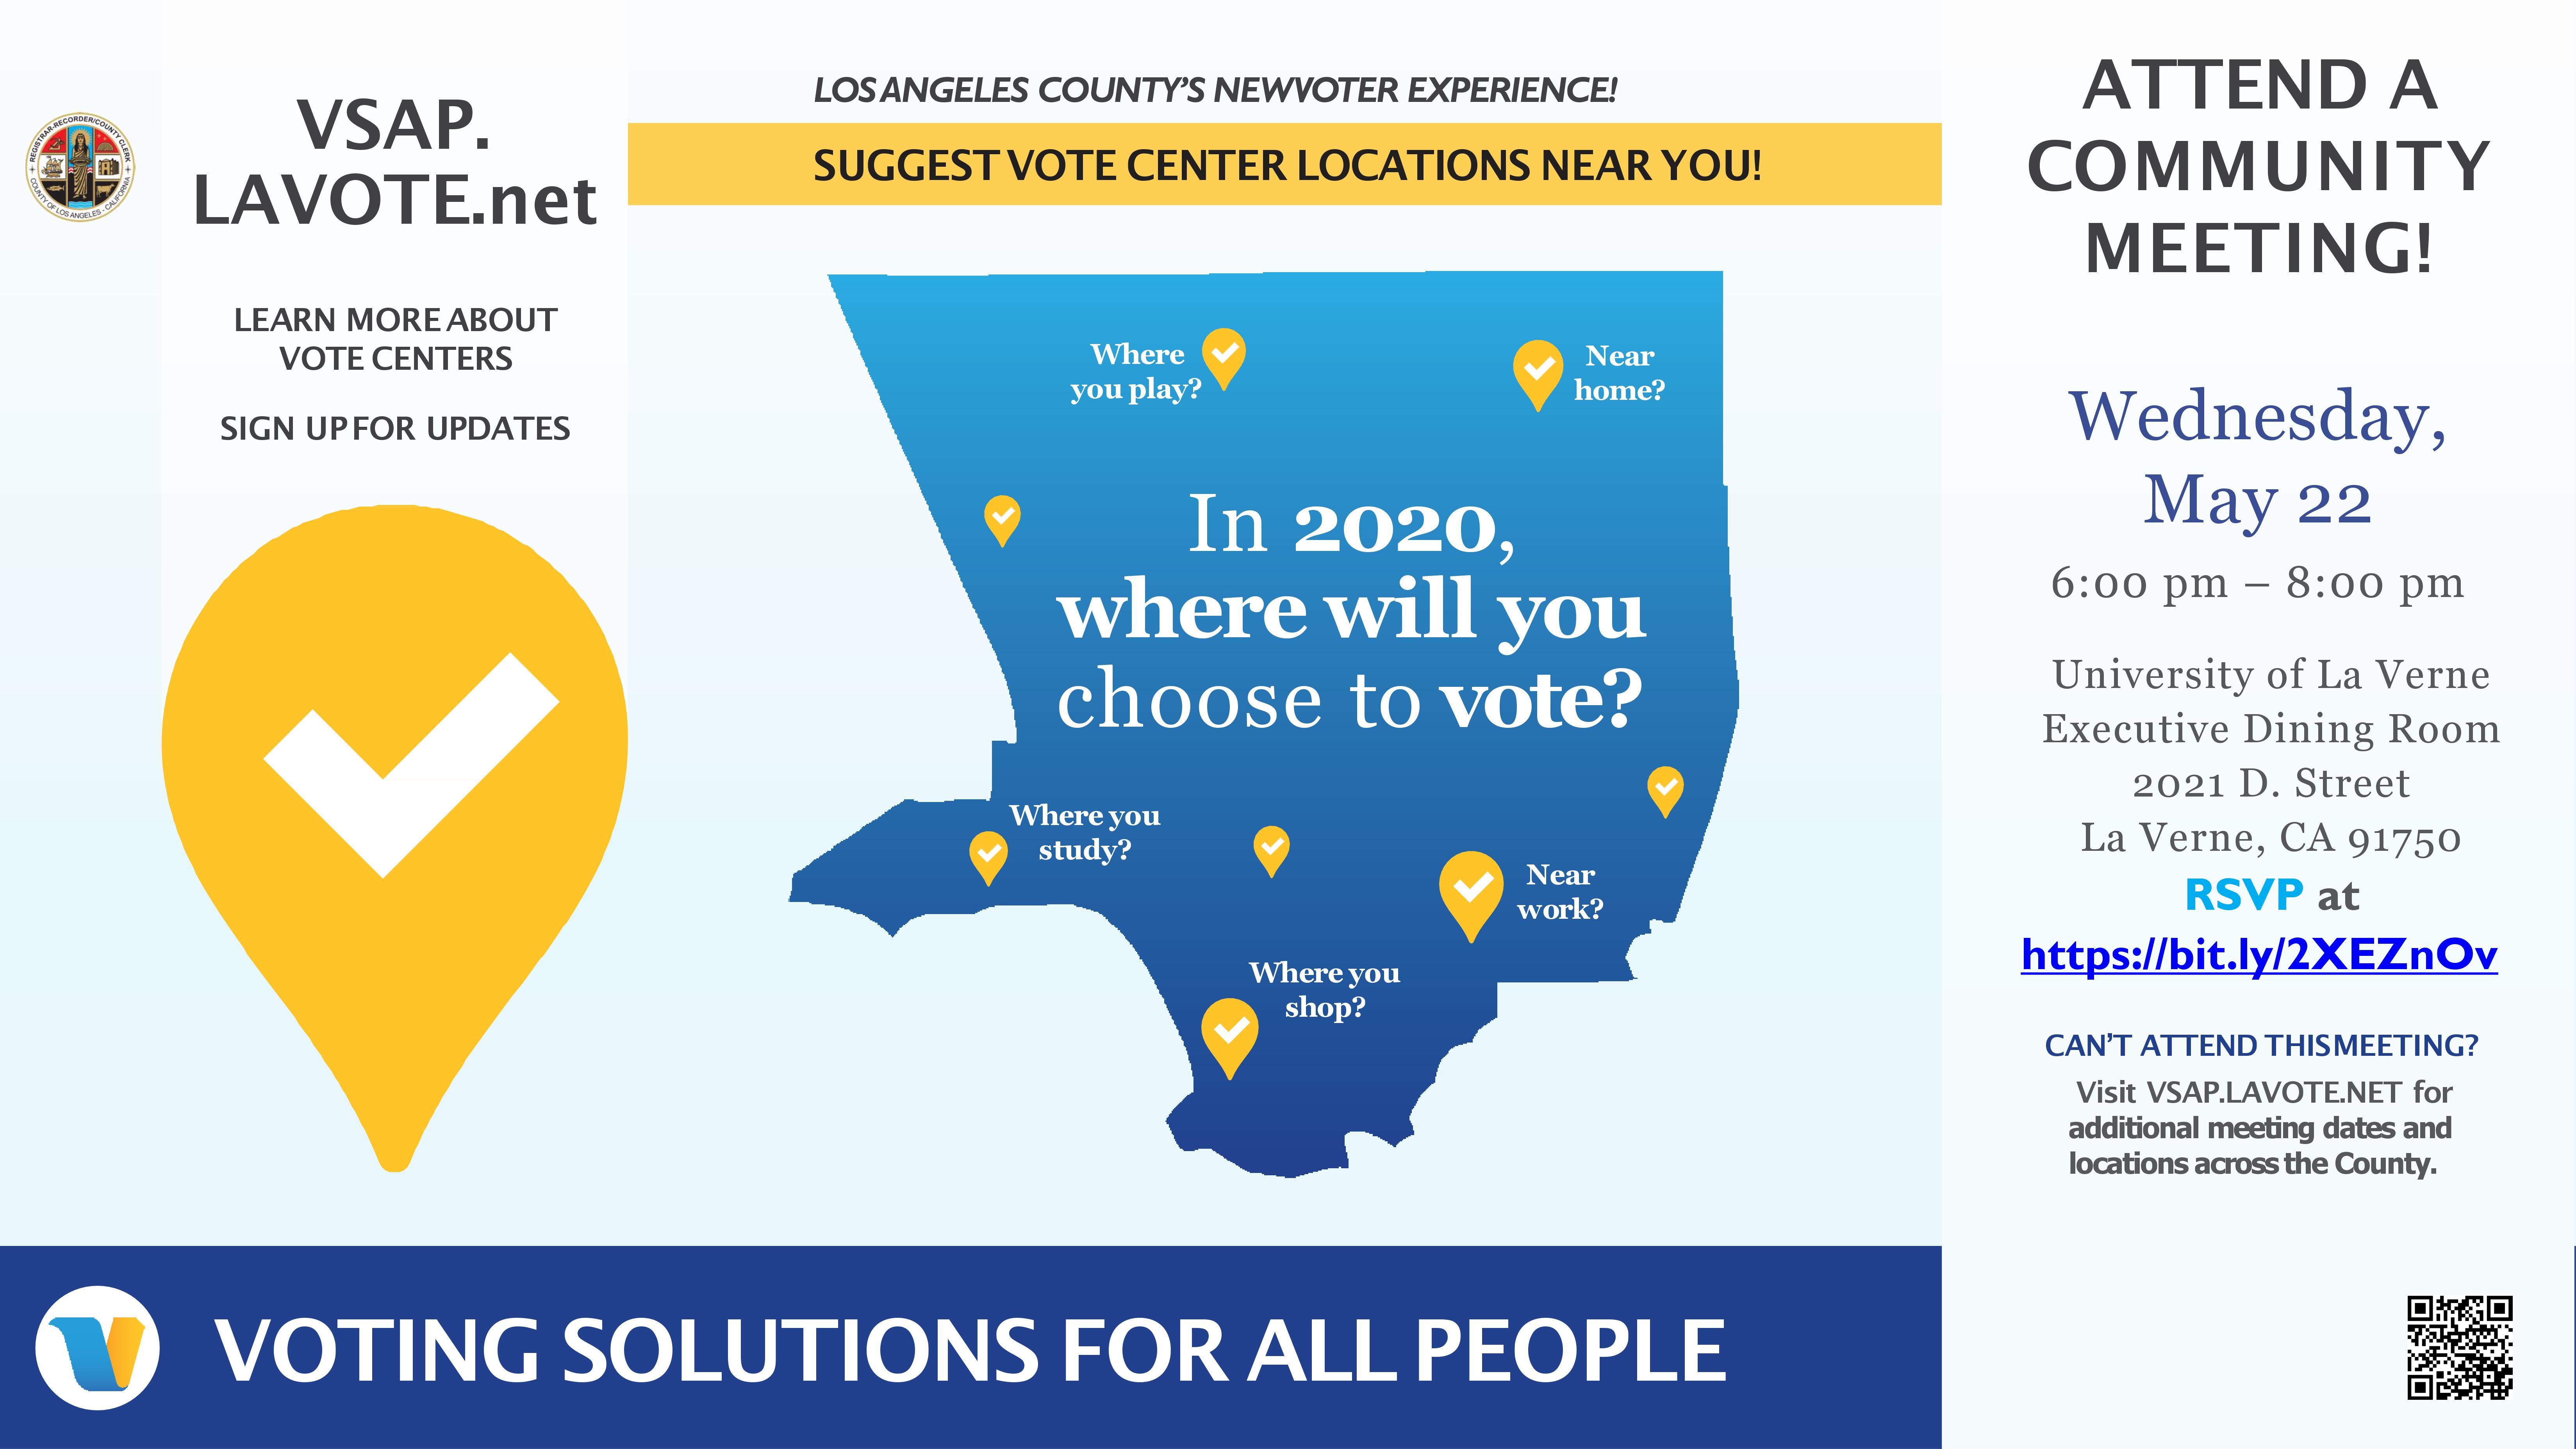 Voting Solutions for All